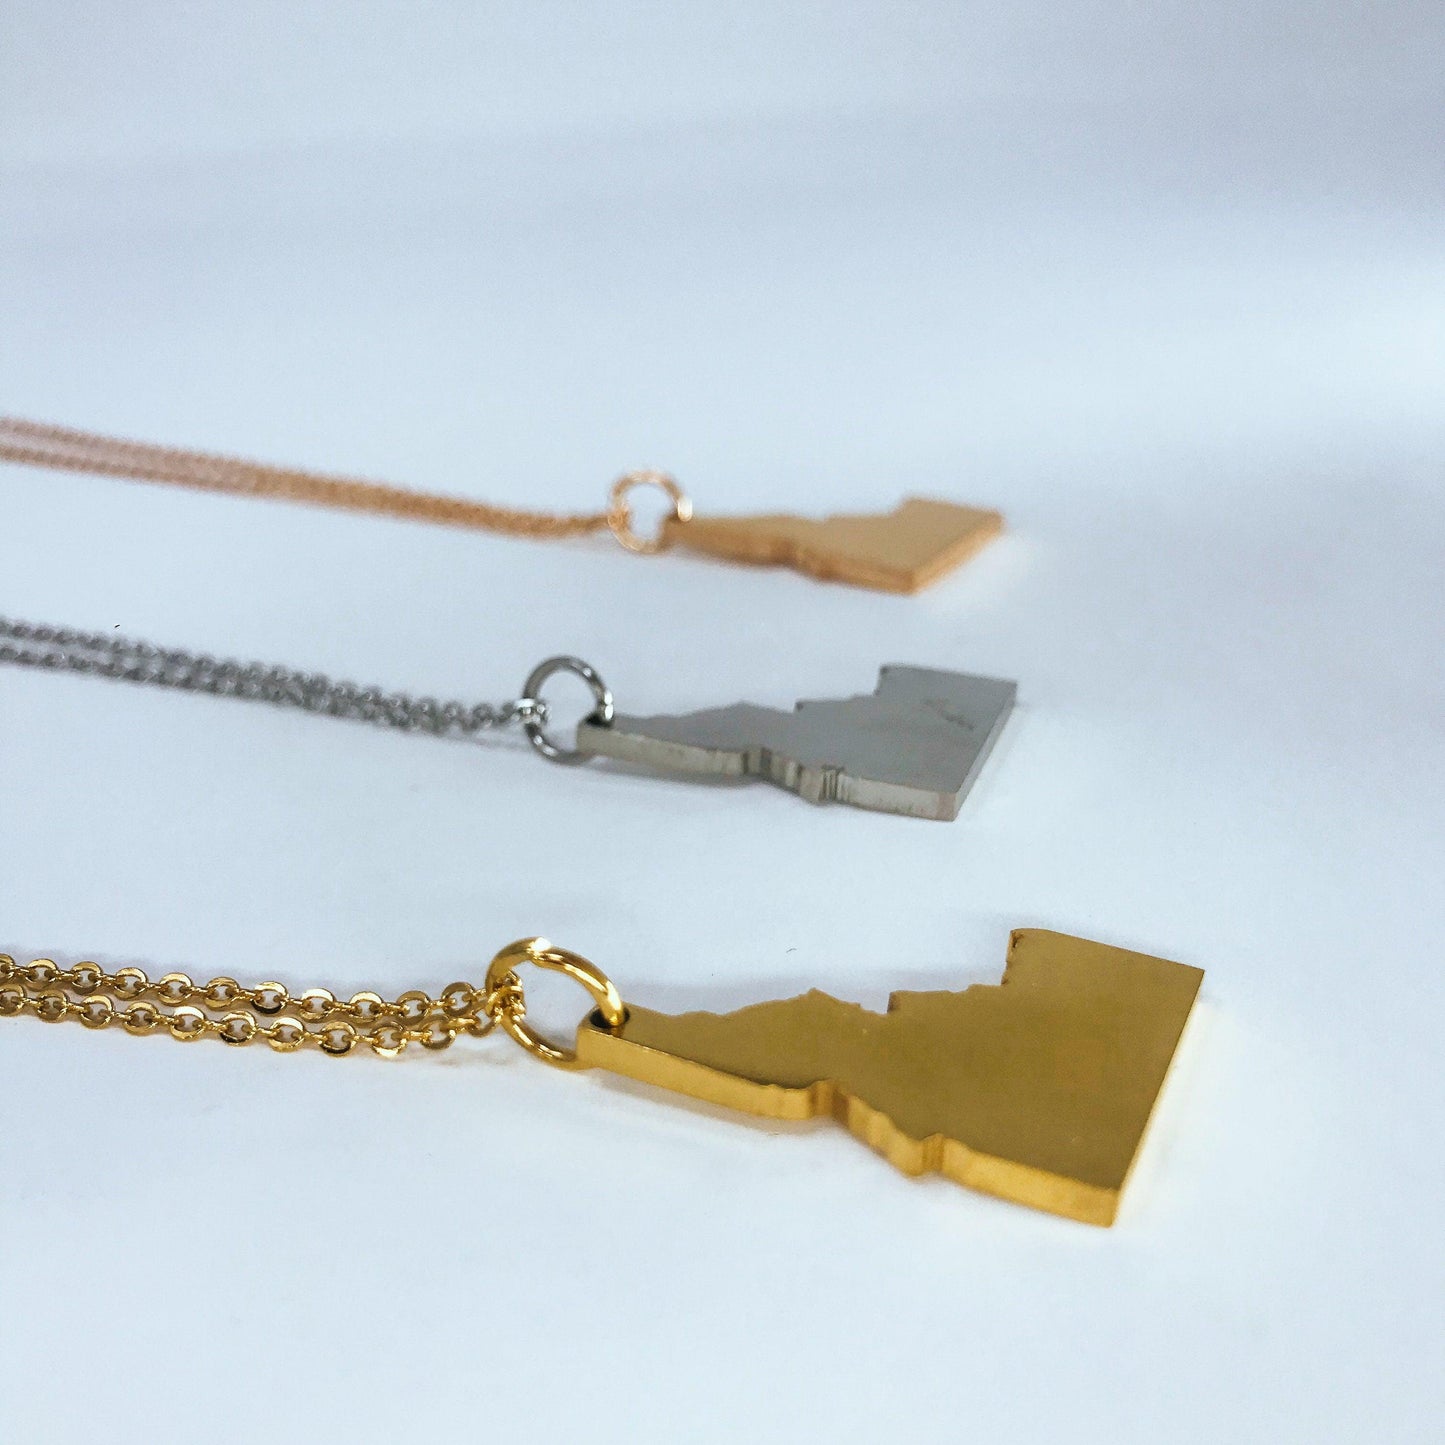 Idaho State Silhouette Necklaces in 3 different colors: Gold, Silver & Rose Gold